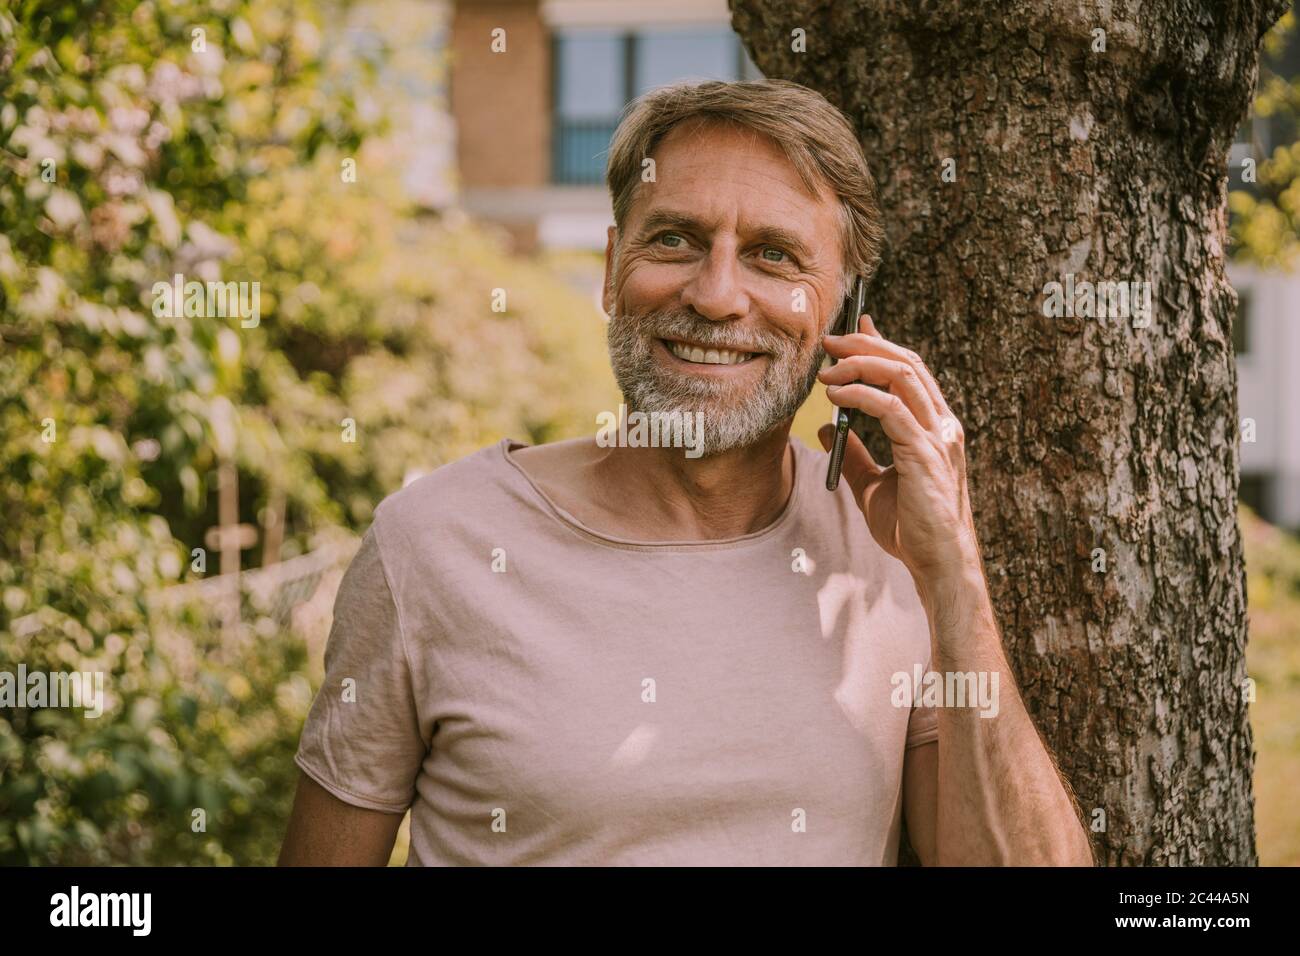 Smiling mature man looking away while talking on mobile phone against tree at garden Stock Photo